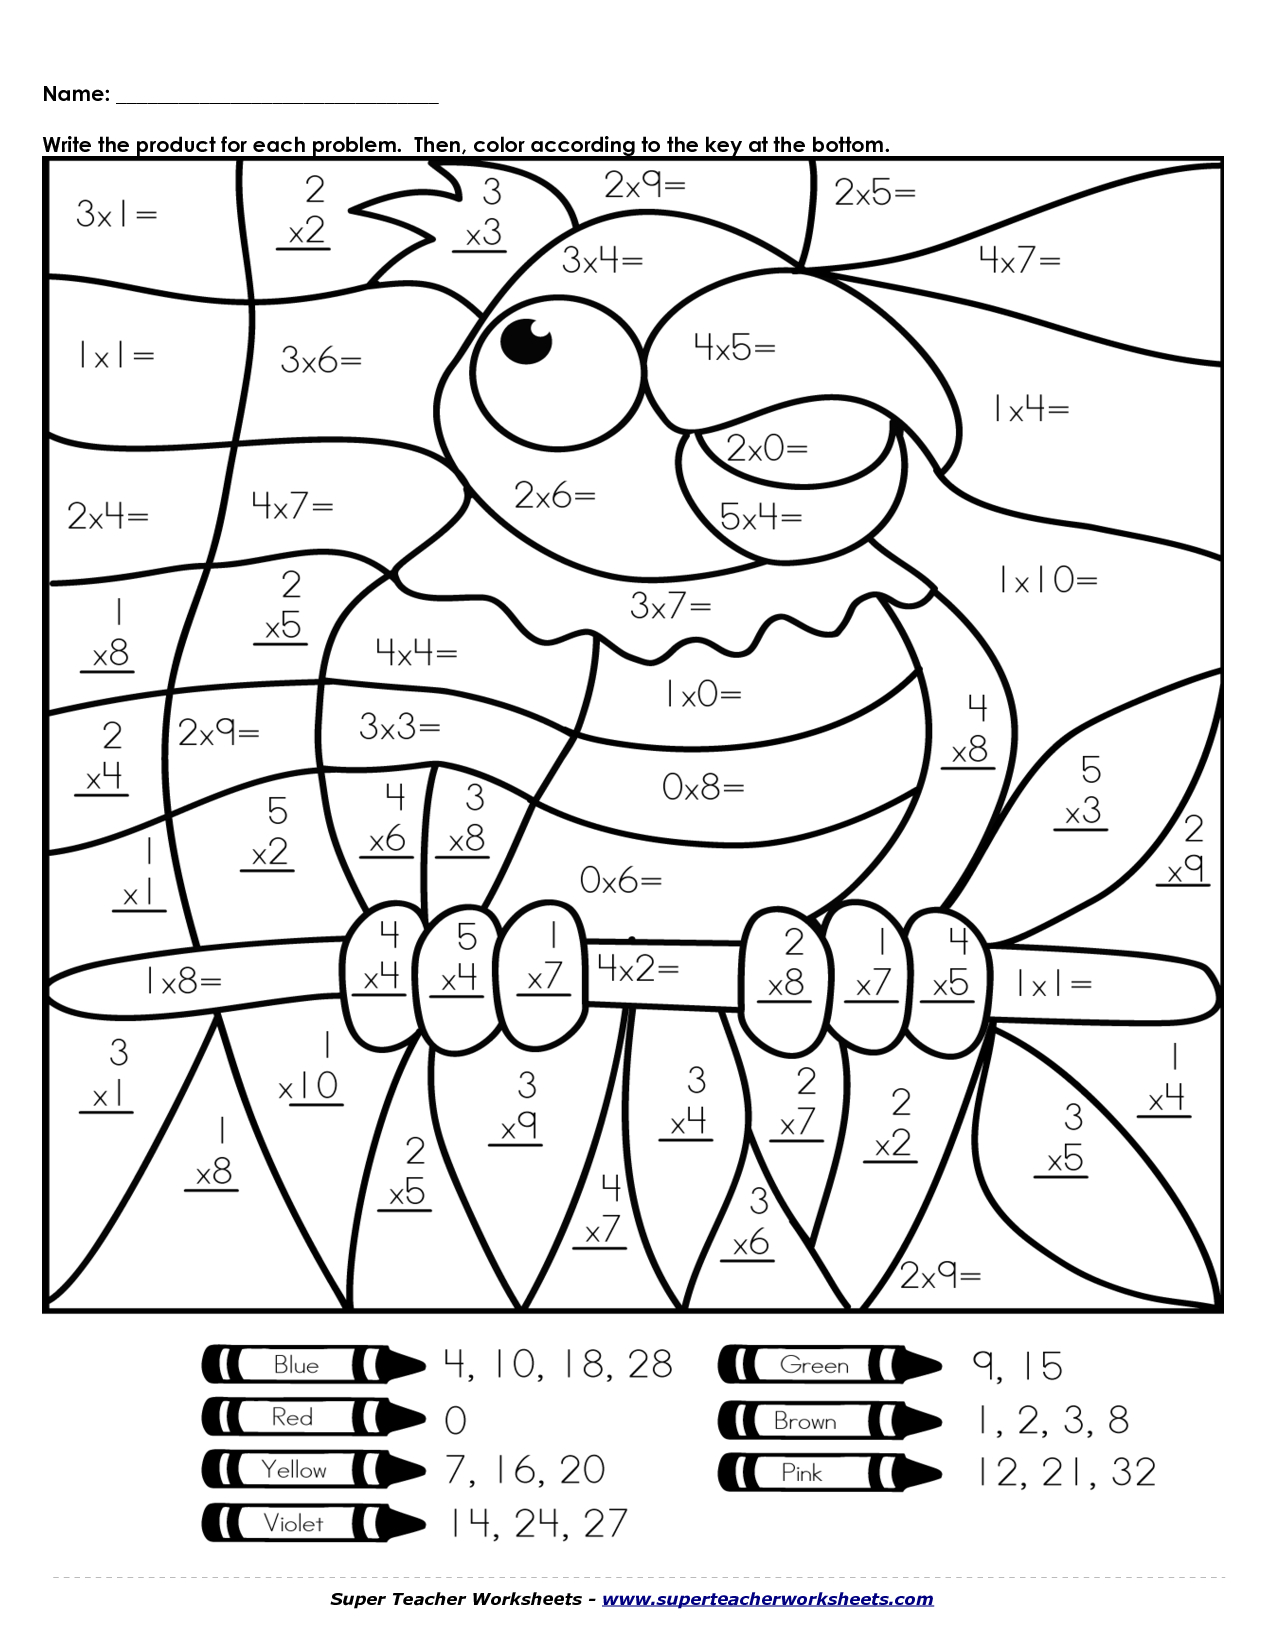 Coloring Book World ~ Math Coloring Worksheets Teachers For Kids - Free Printable Math Coloring Sheets